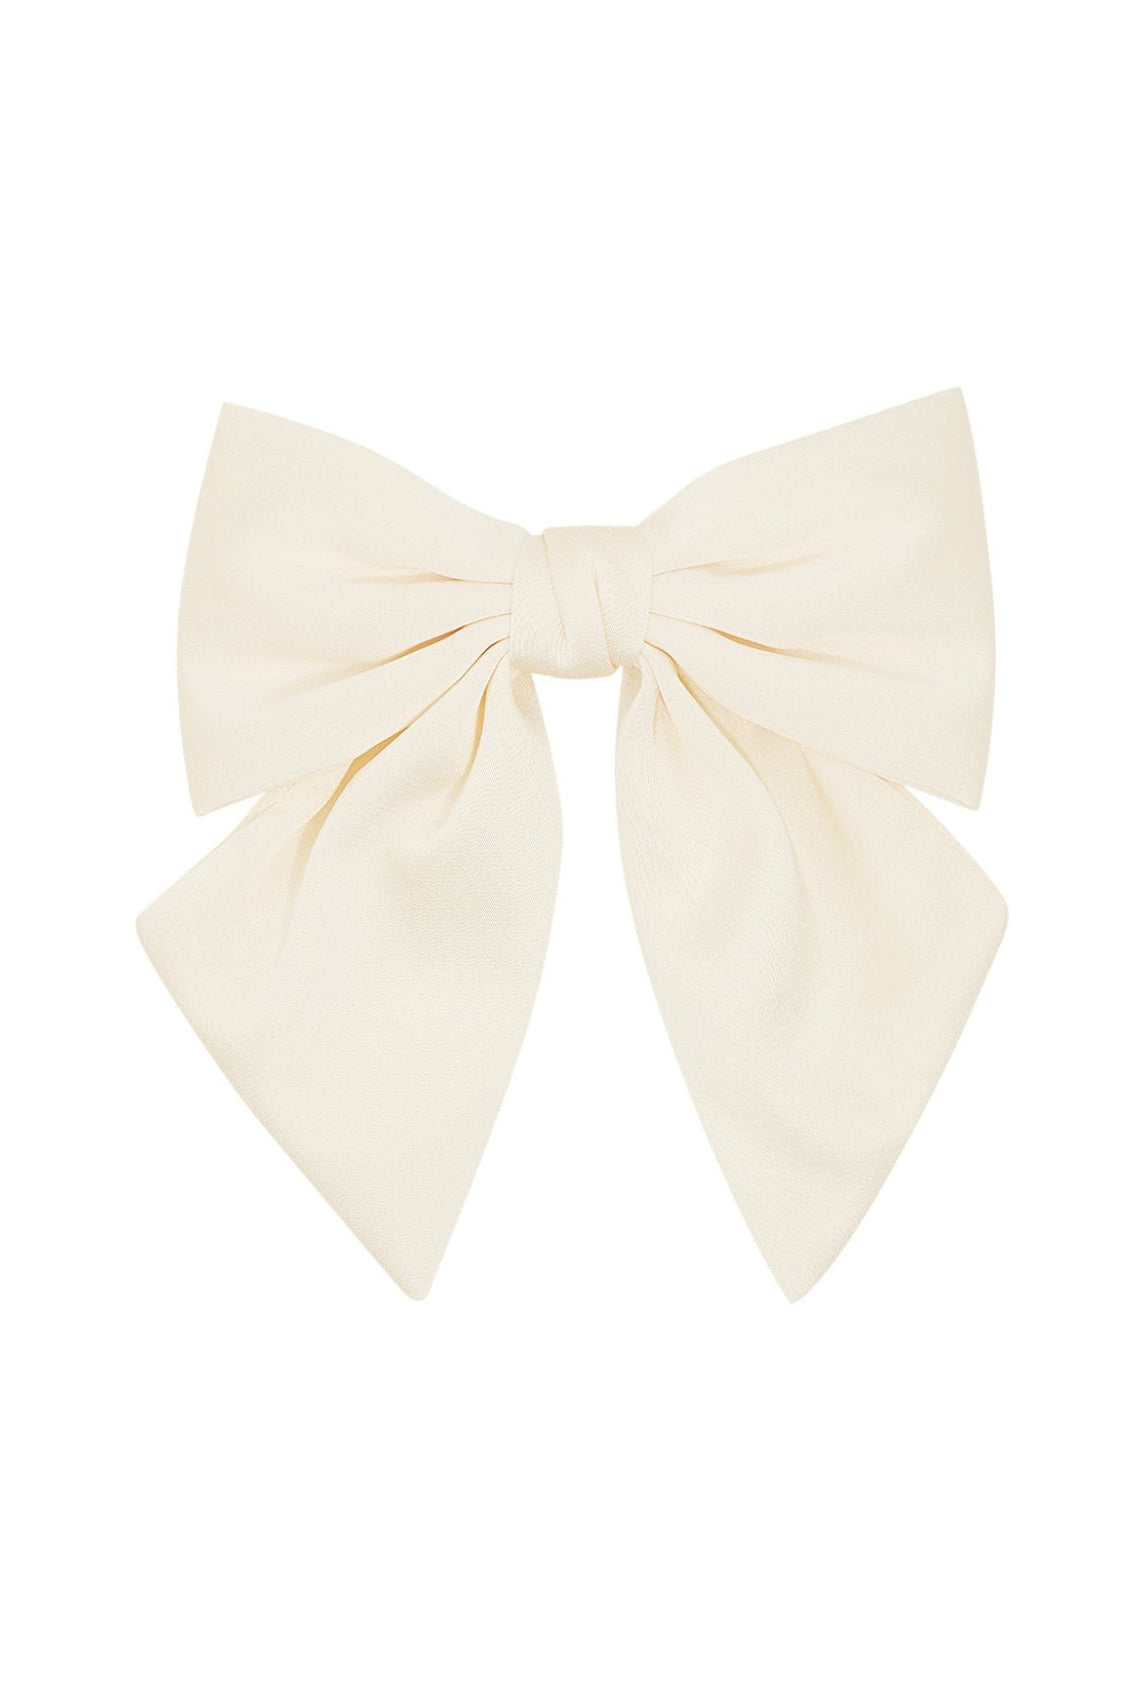 HAIRBOW OFF WHITE - My Favourites